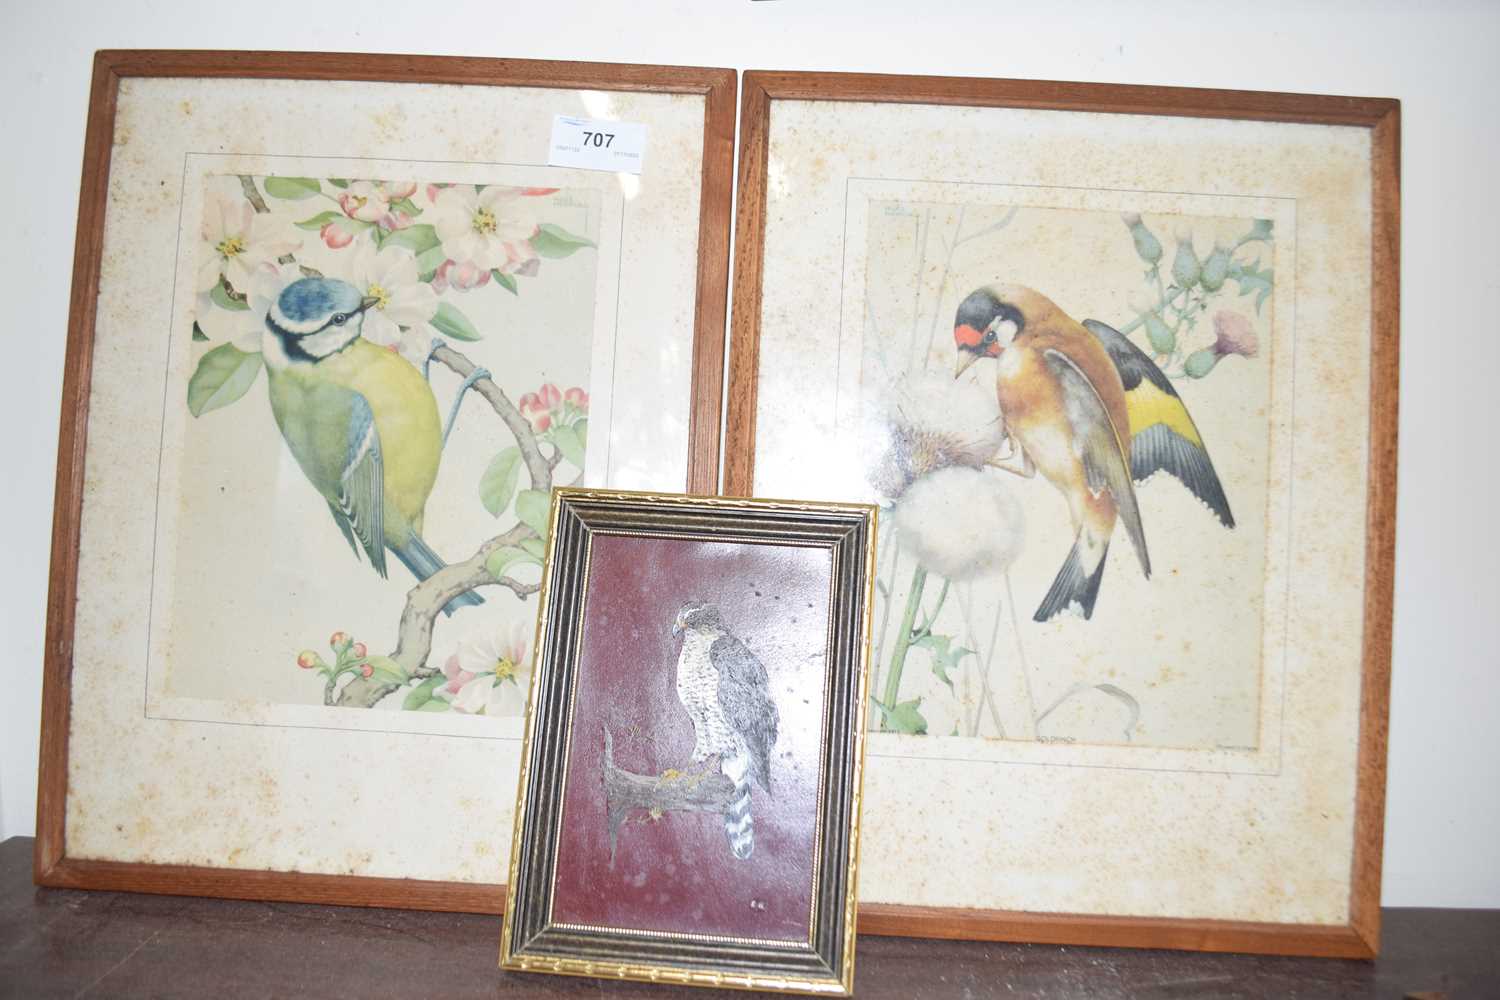 Coloured print, goldfinch and blue tit together with a further study of a hawk (3)